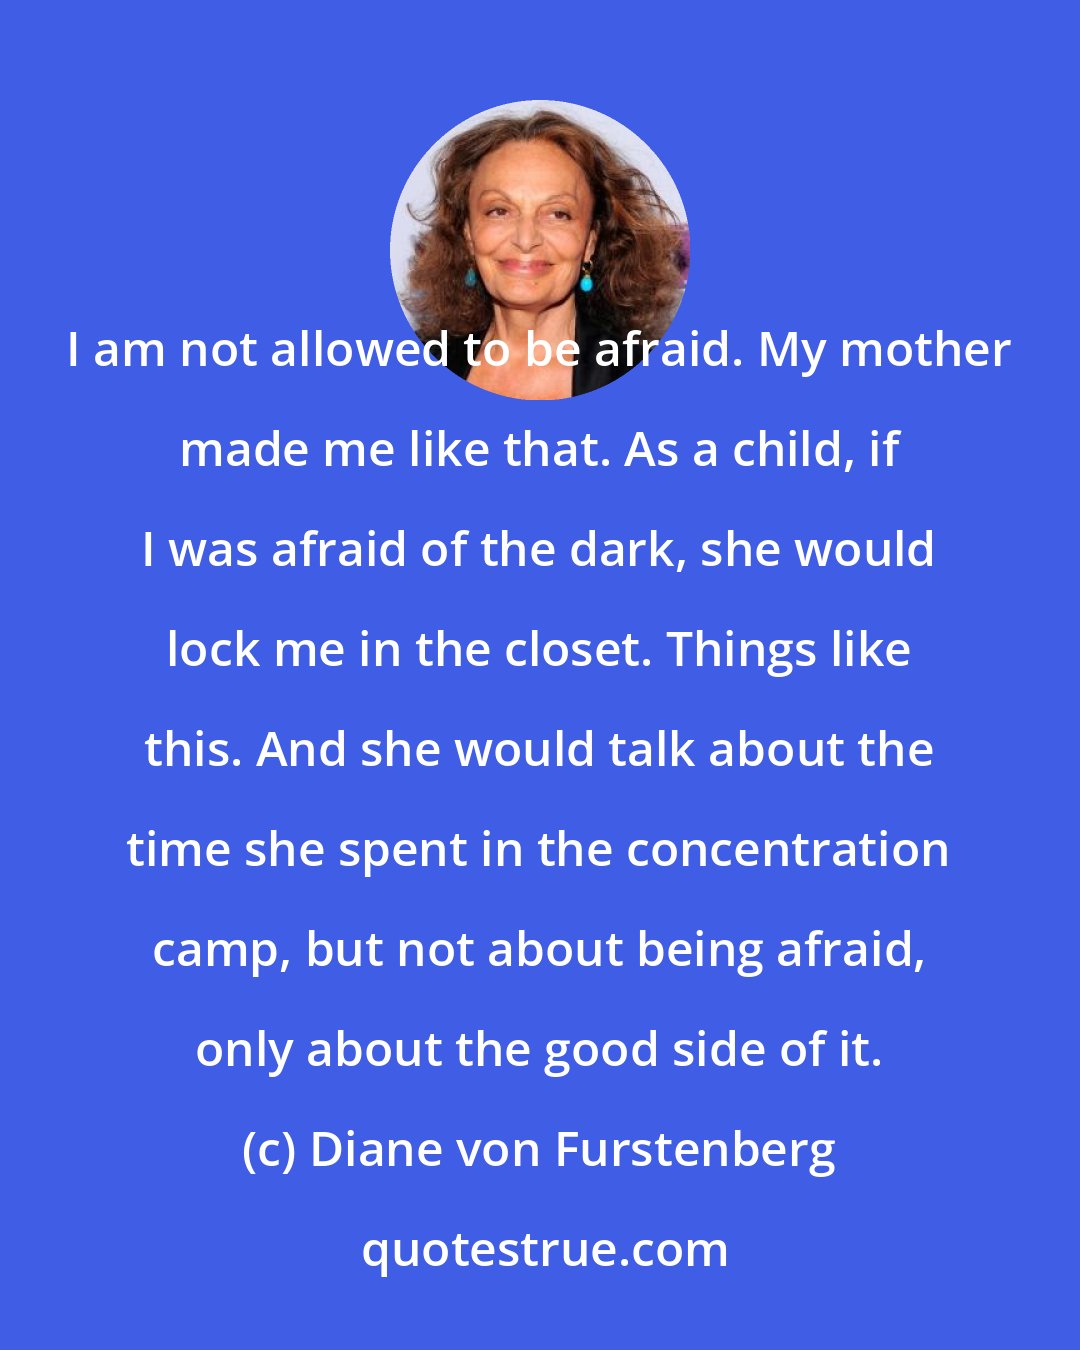 Diane von Furstenberg: I am not allowed to be afraid. My mother made me like that. As a child, if I was afraid of the dark, she would lock me in the closet. Things like this. And she would talk about the time she spent in the concentration camp, but not about being afraid, only about the good side of it.